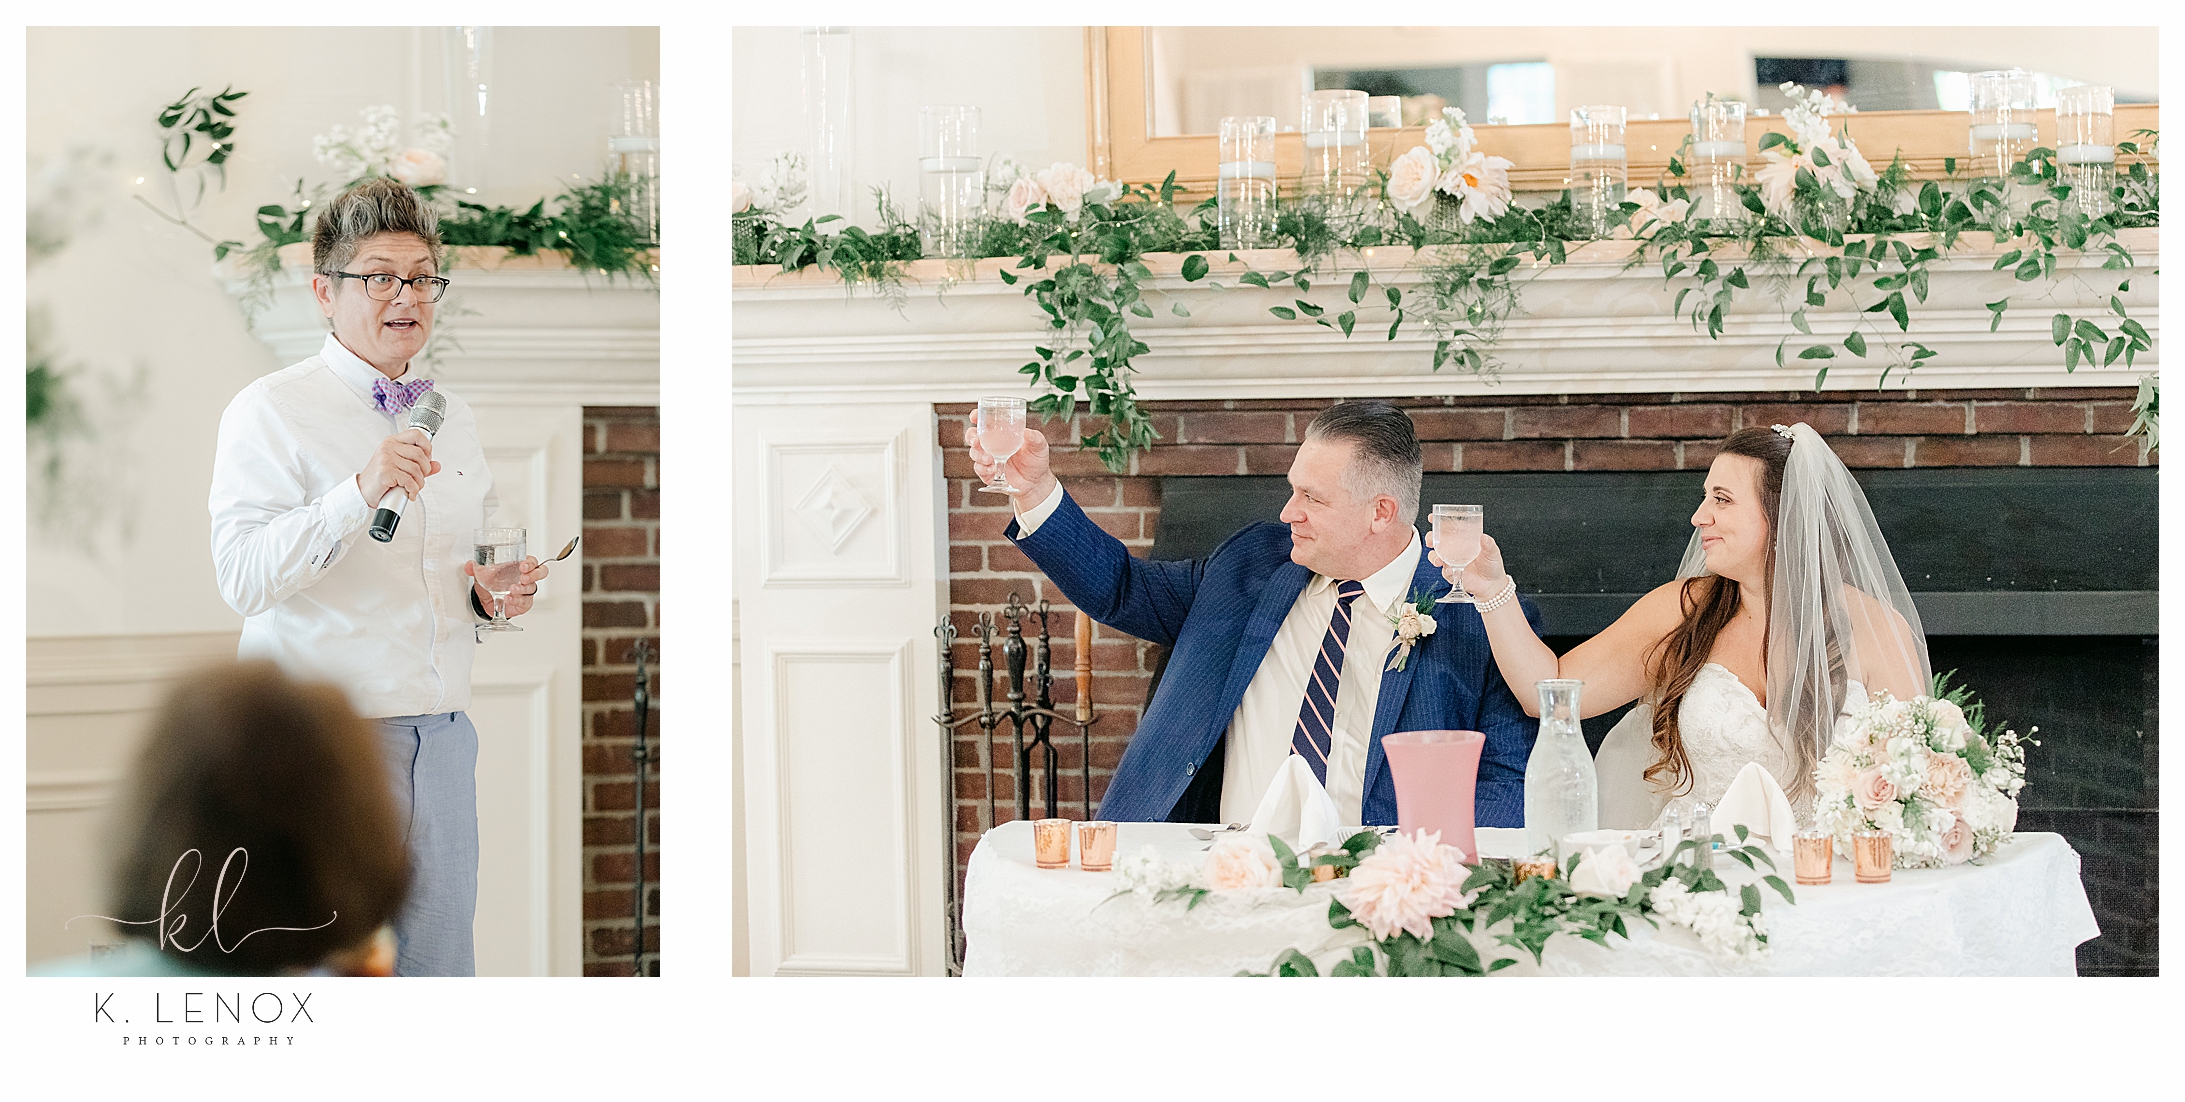 Wedding at the Keene Country Club- Toasts